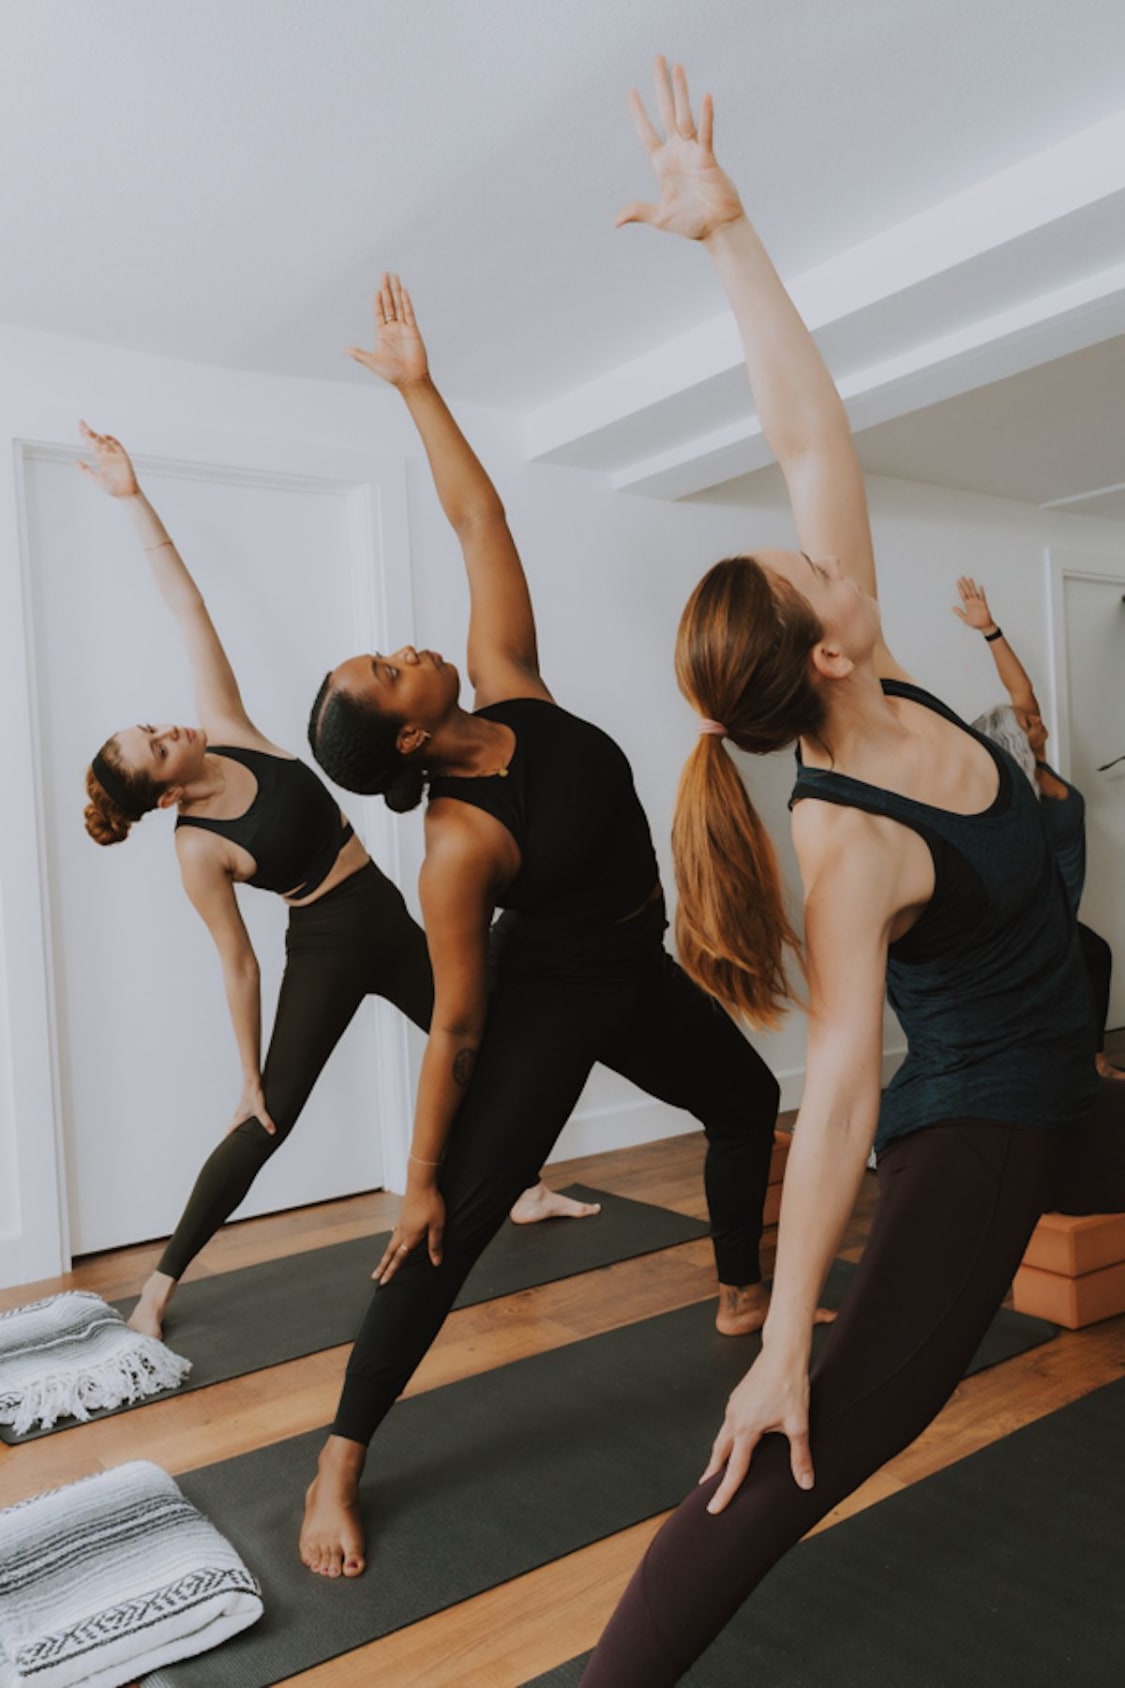 Austin Yoga Lounge: Read Reviews and Book Classes on ClassPass